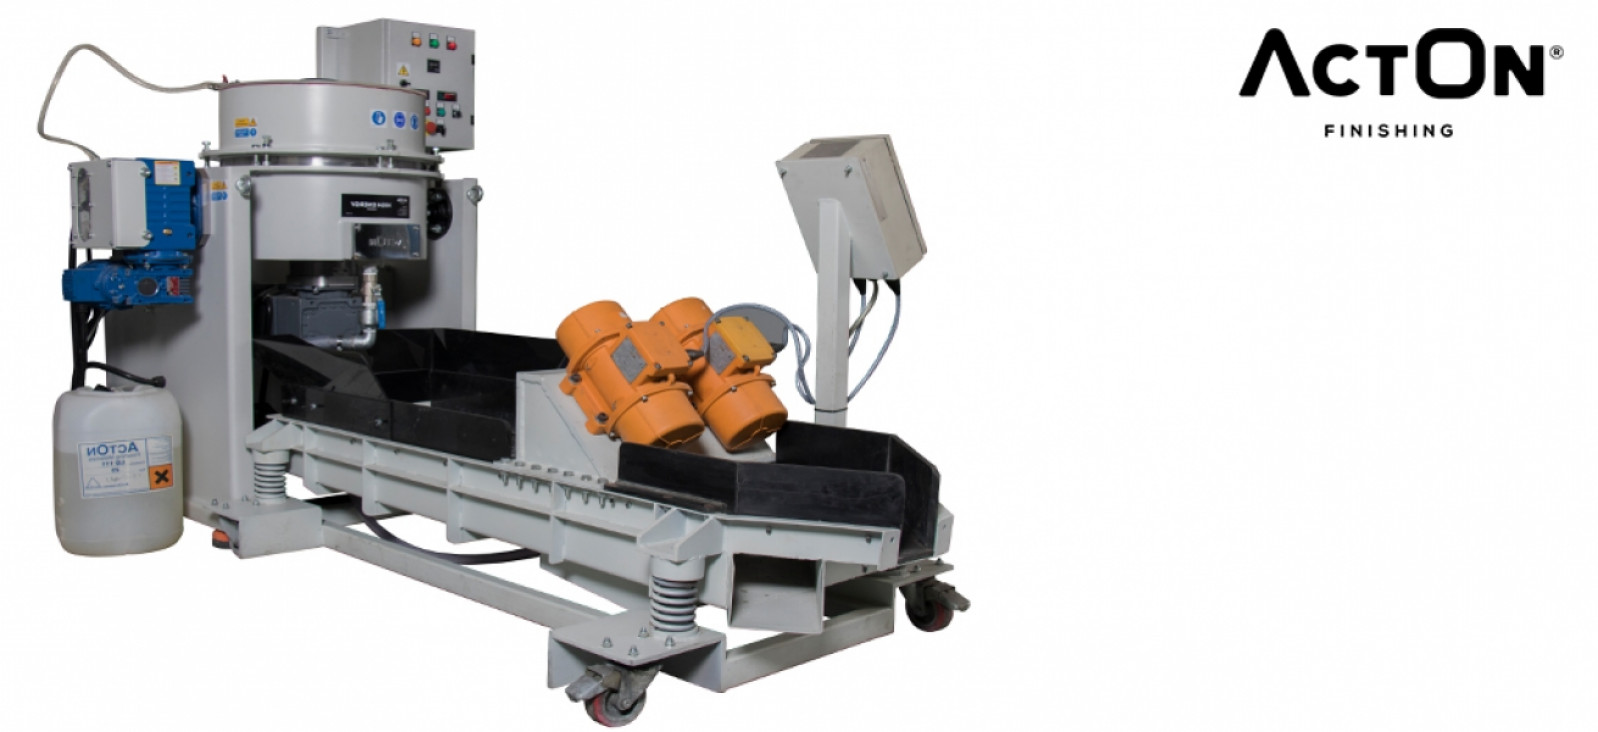 Fast and Reliable, ActOn Centrifugal Disc Finishing Machine is Here